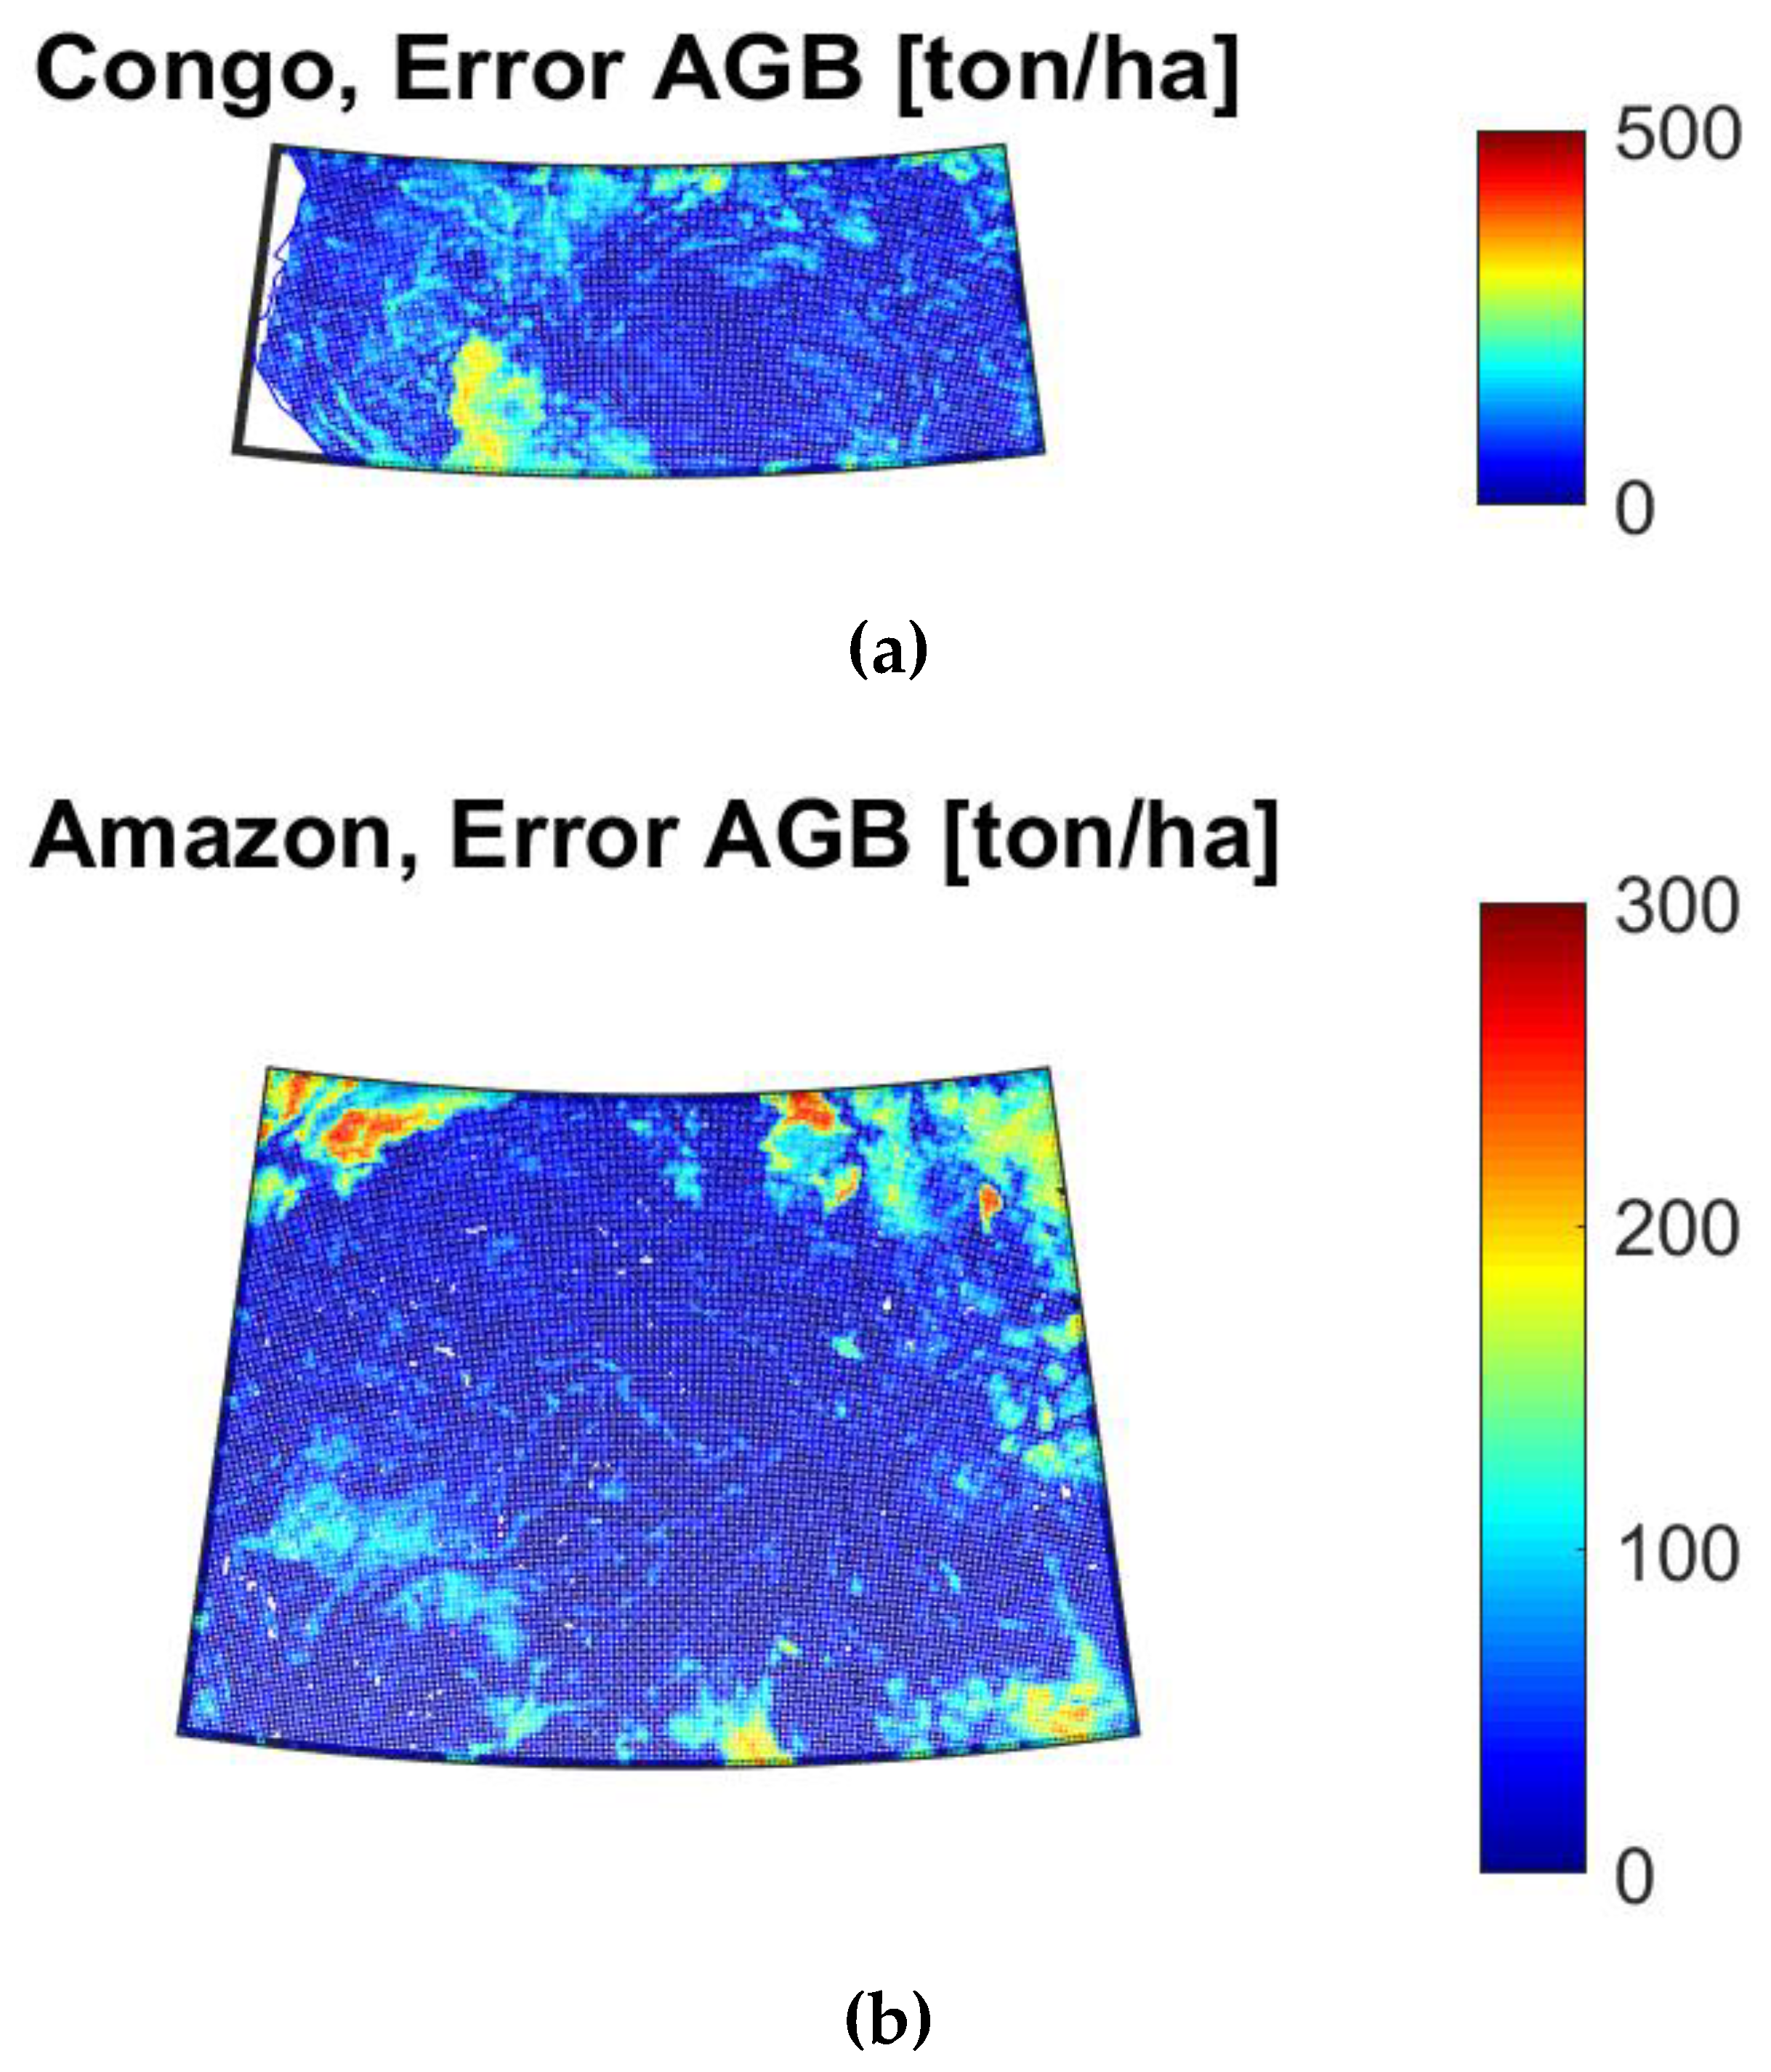 Remote Sensing | Free Full-Text | Above-Ground Biomass Retrieval over  Tropical Forests: A Novel GNSS-R Approach with CyGNSS | HTML